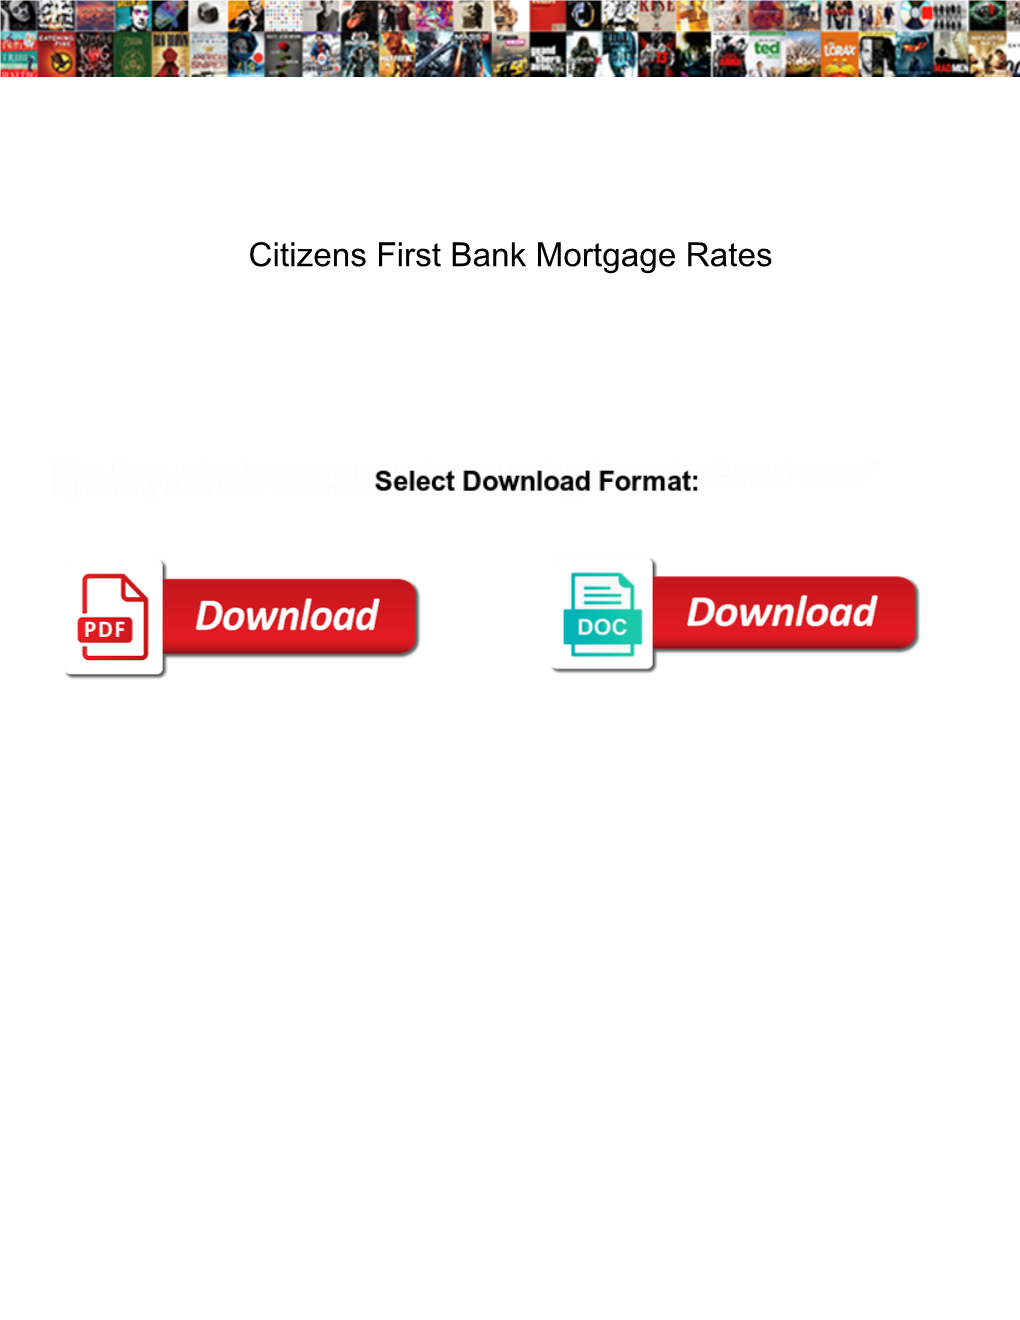 Citizens First Bank Mortgage Rates